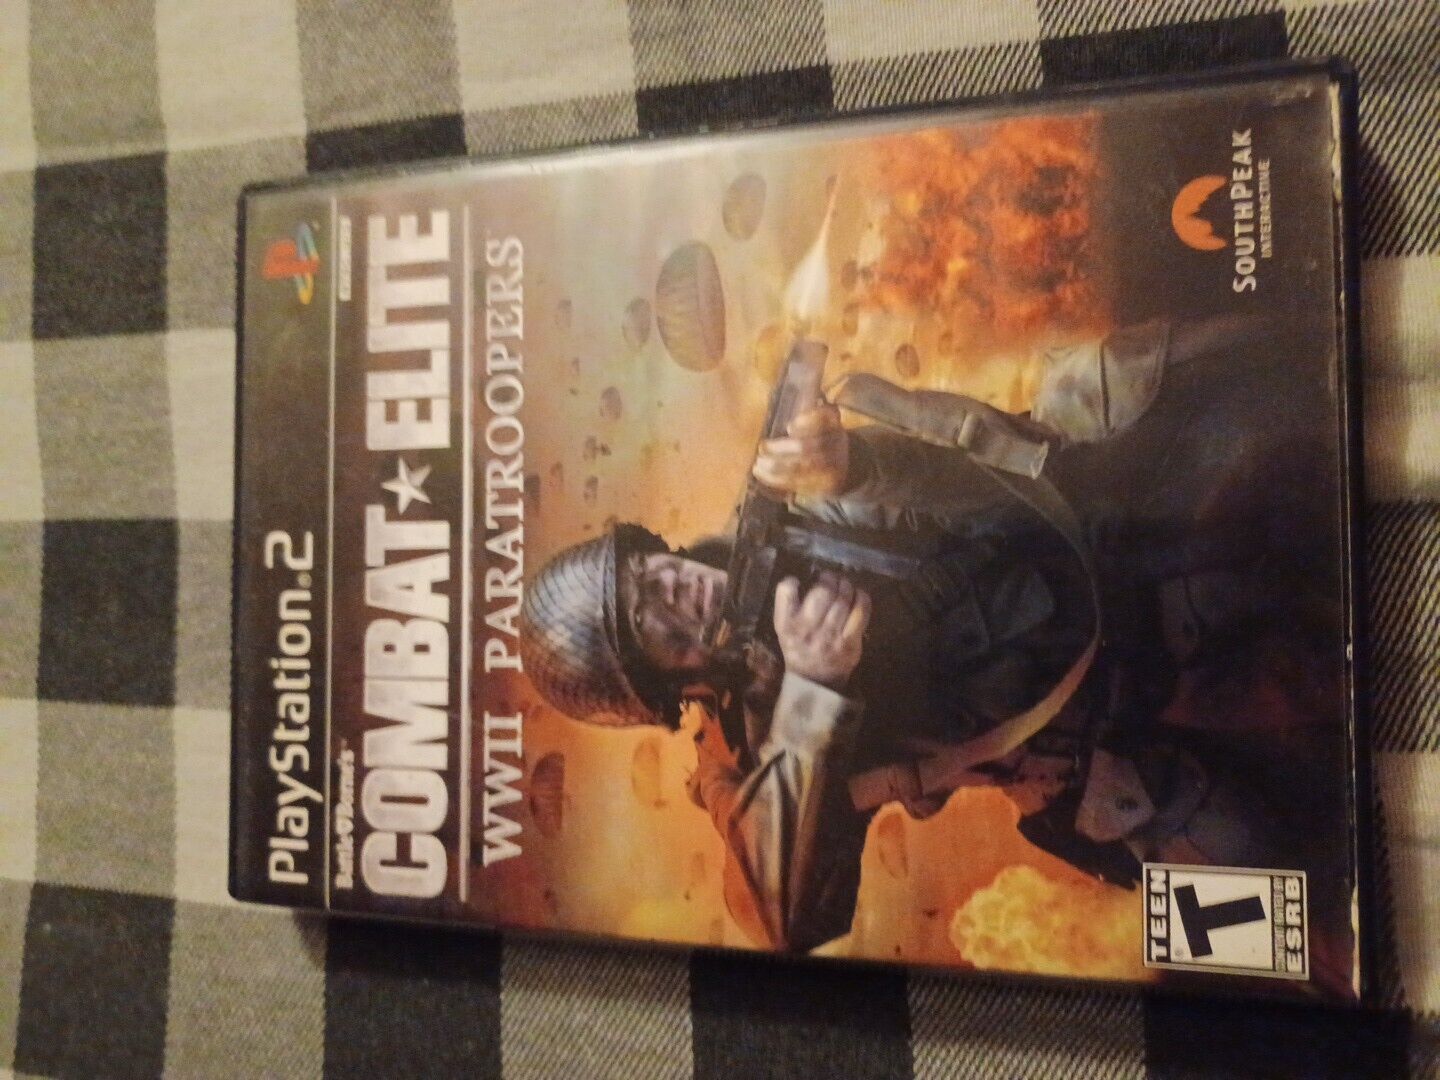 Combat Elite: WWII Paratroopers (Sony PlayStation 2, 2005)